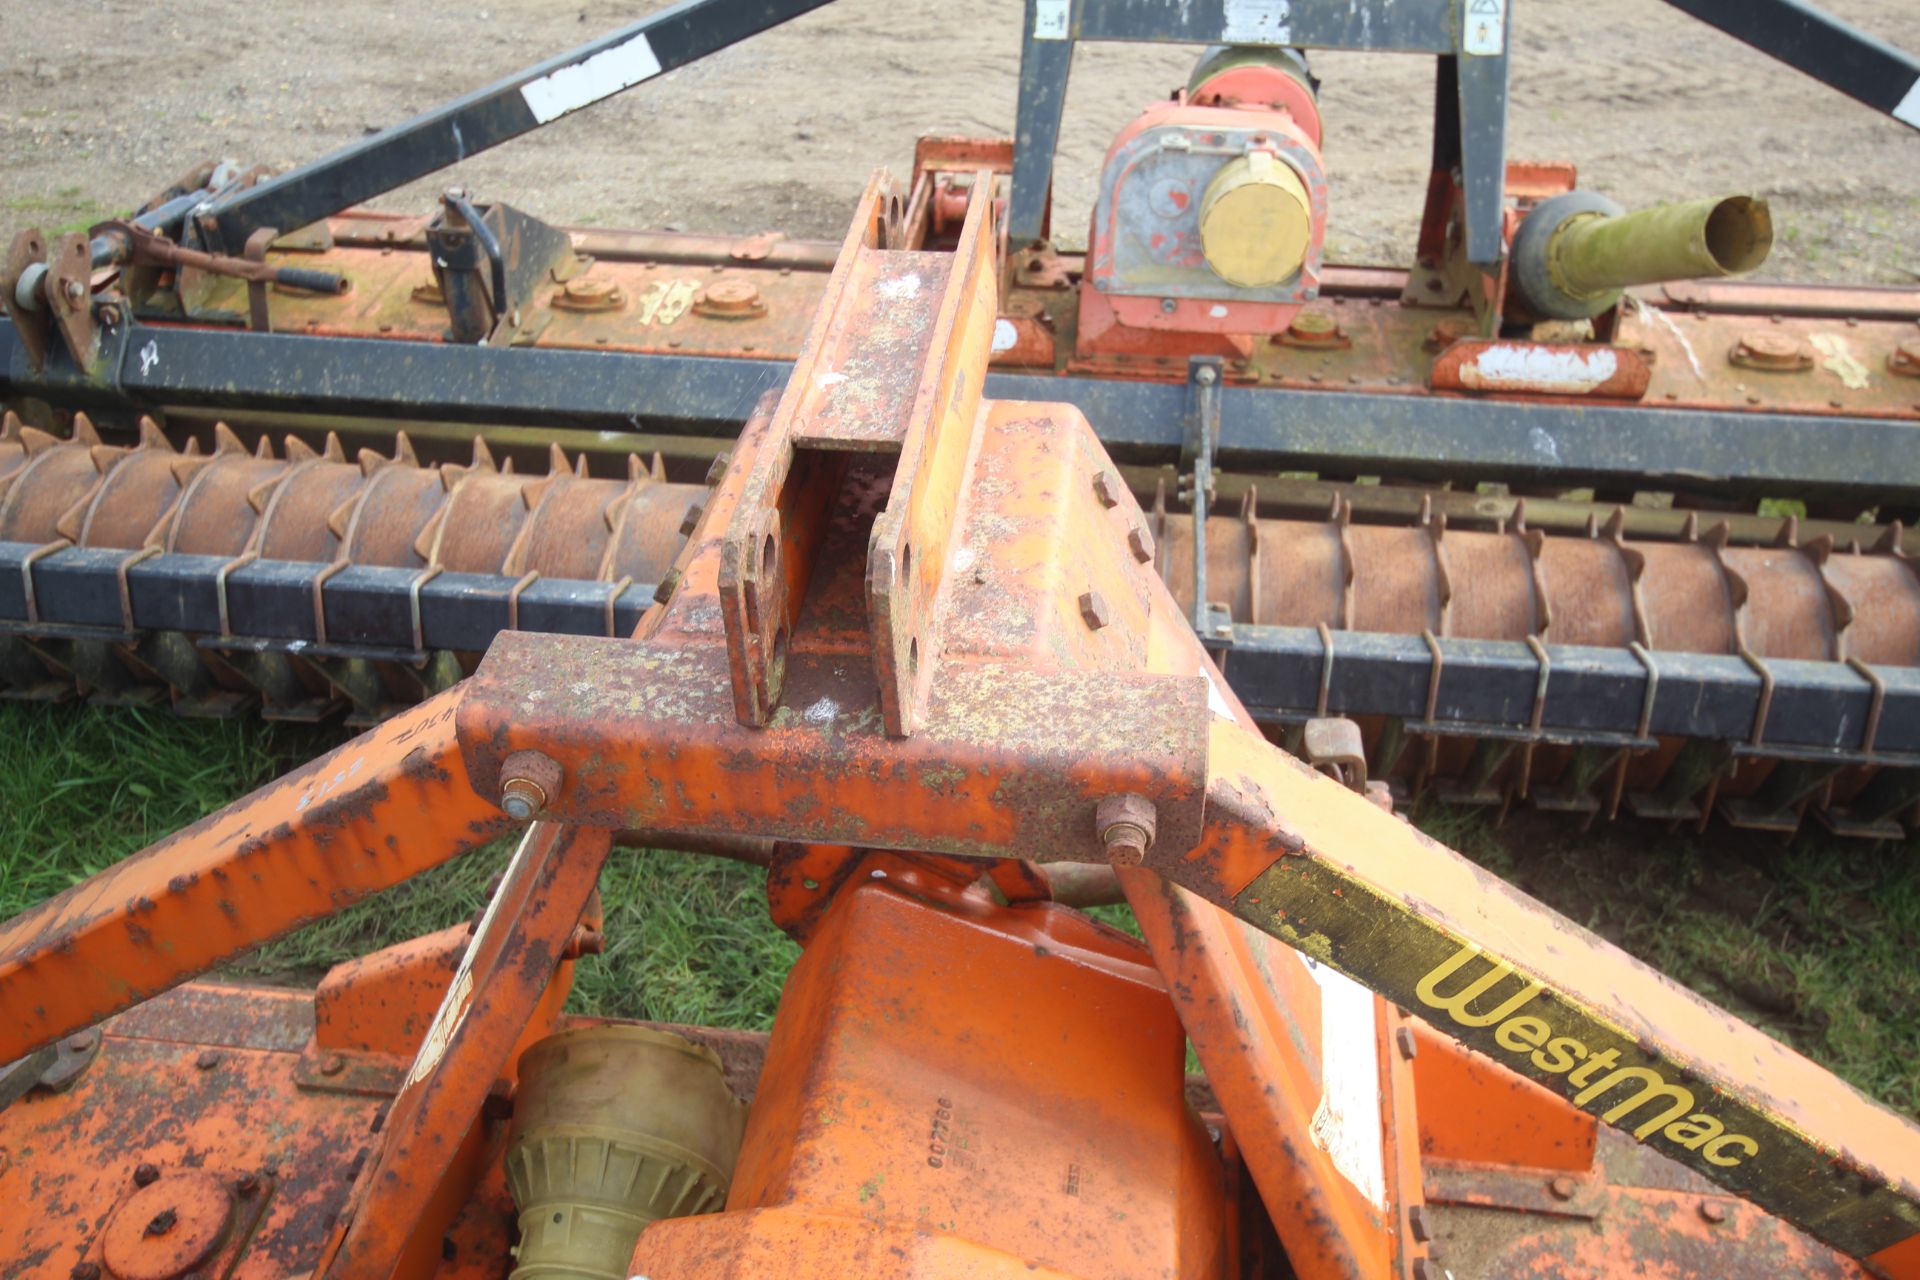 Westmac Pegararo 3m power harrow. Vendor reports owned since 2001 and used regularly. For sale due - Bild 10 aus 16